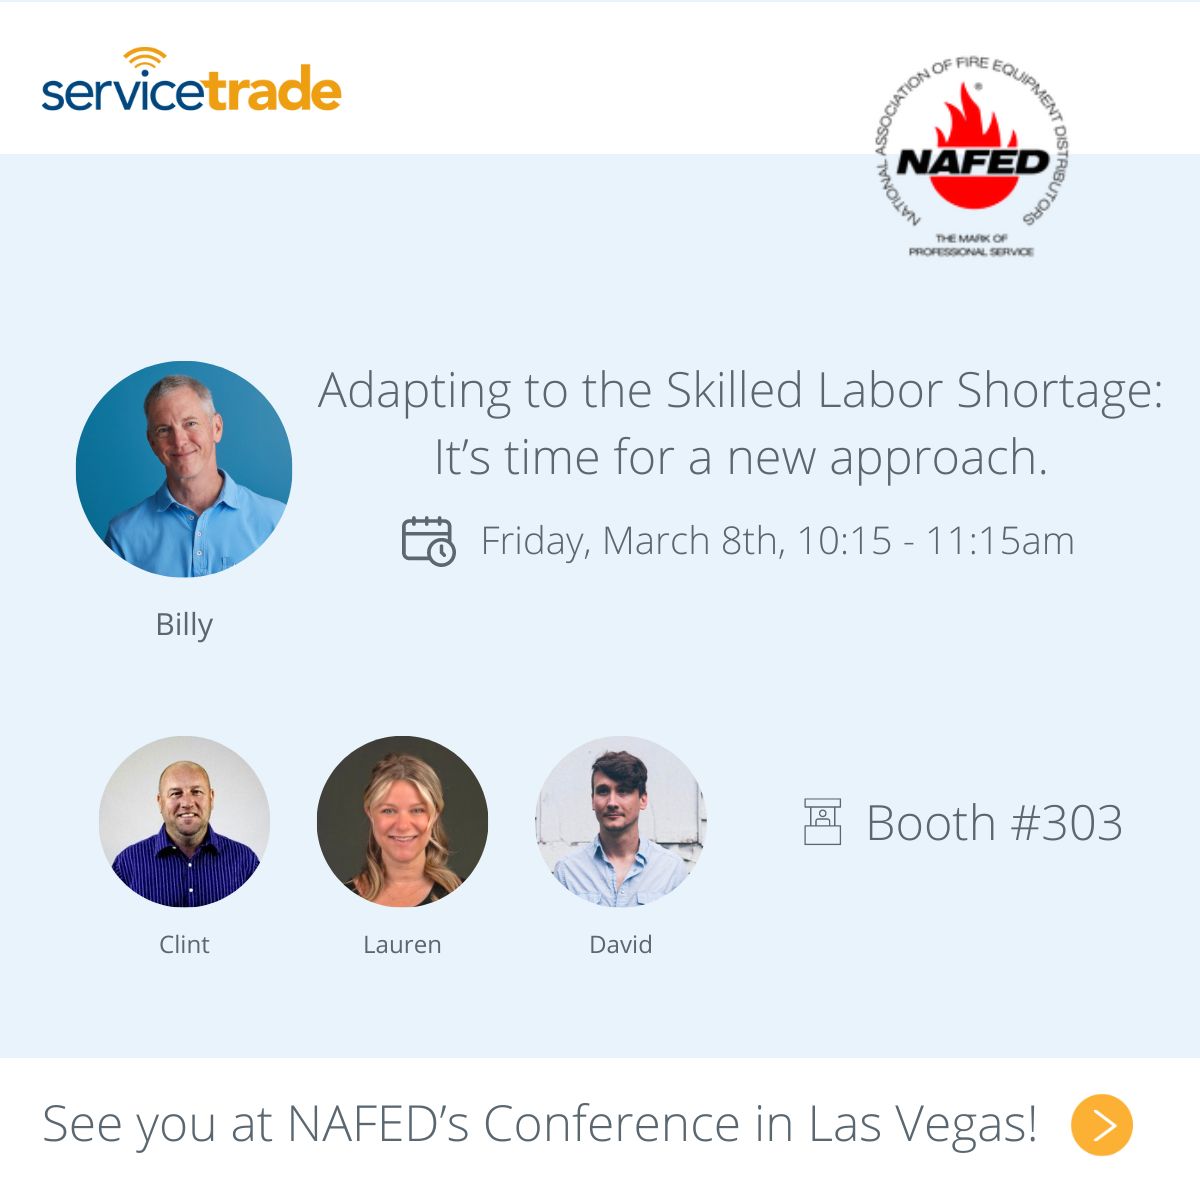 Our own Billy Marshall is excited to be presenting at the upcoming #NAFEDconference! Don't miss his presentation March 8th on navigating the skilled labor shortage. Make sure that you stop by booth 303 to learn how we can help.

#FireInspection #FireProtection #SkilledLabor